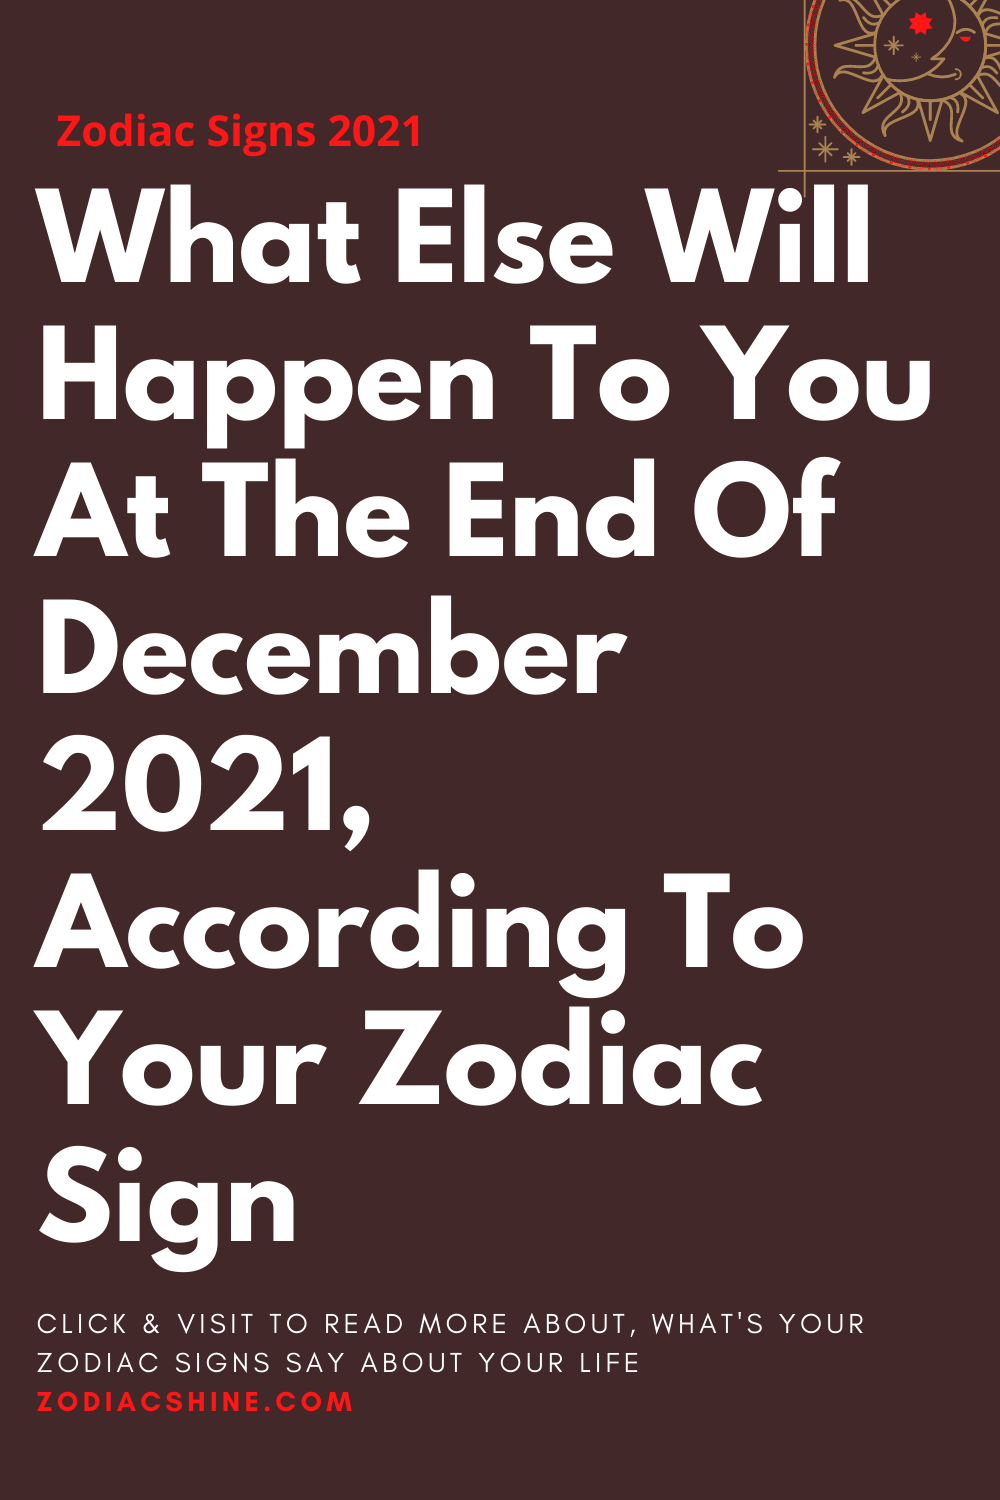 What Else Will Happen To You At The End Of December 2021 According To Your Zodiac Sign